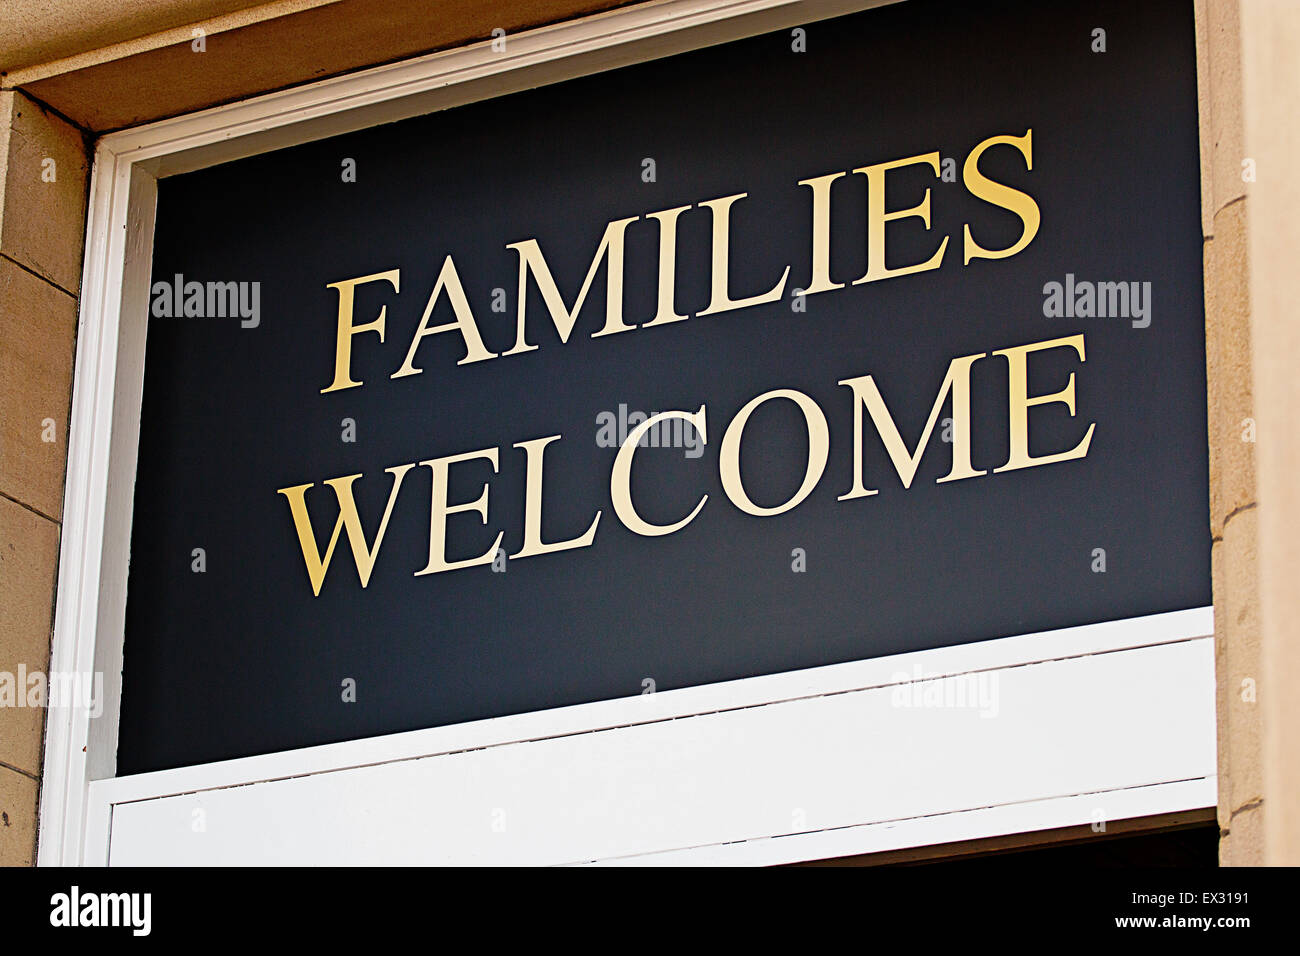 Families welcome sign outside restaurant inviting children to eat bar meals in selected licensed premises Stock Photo